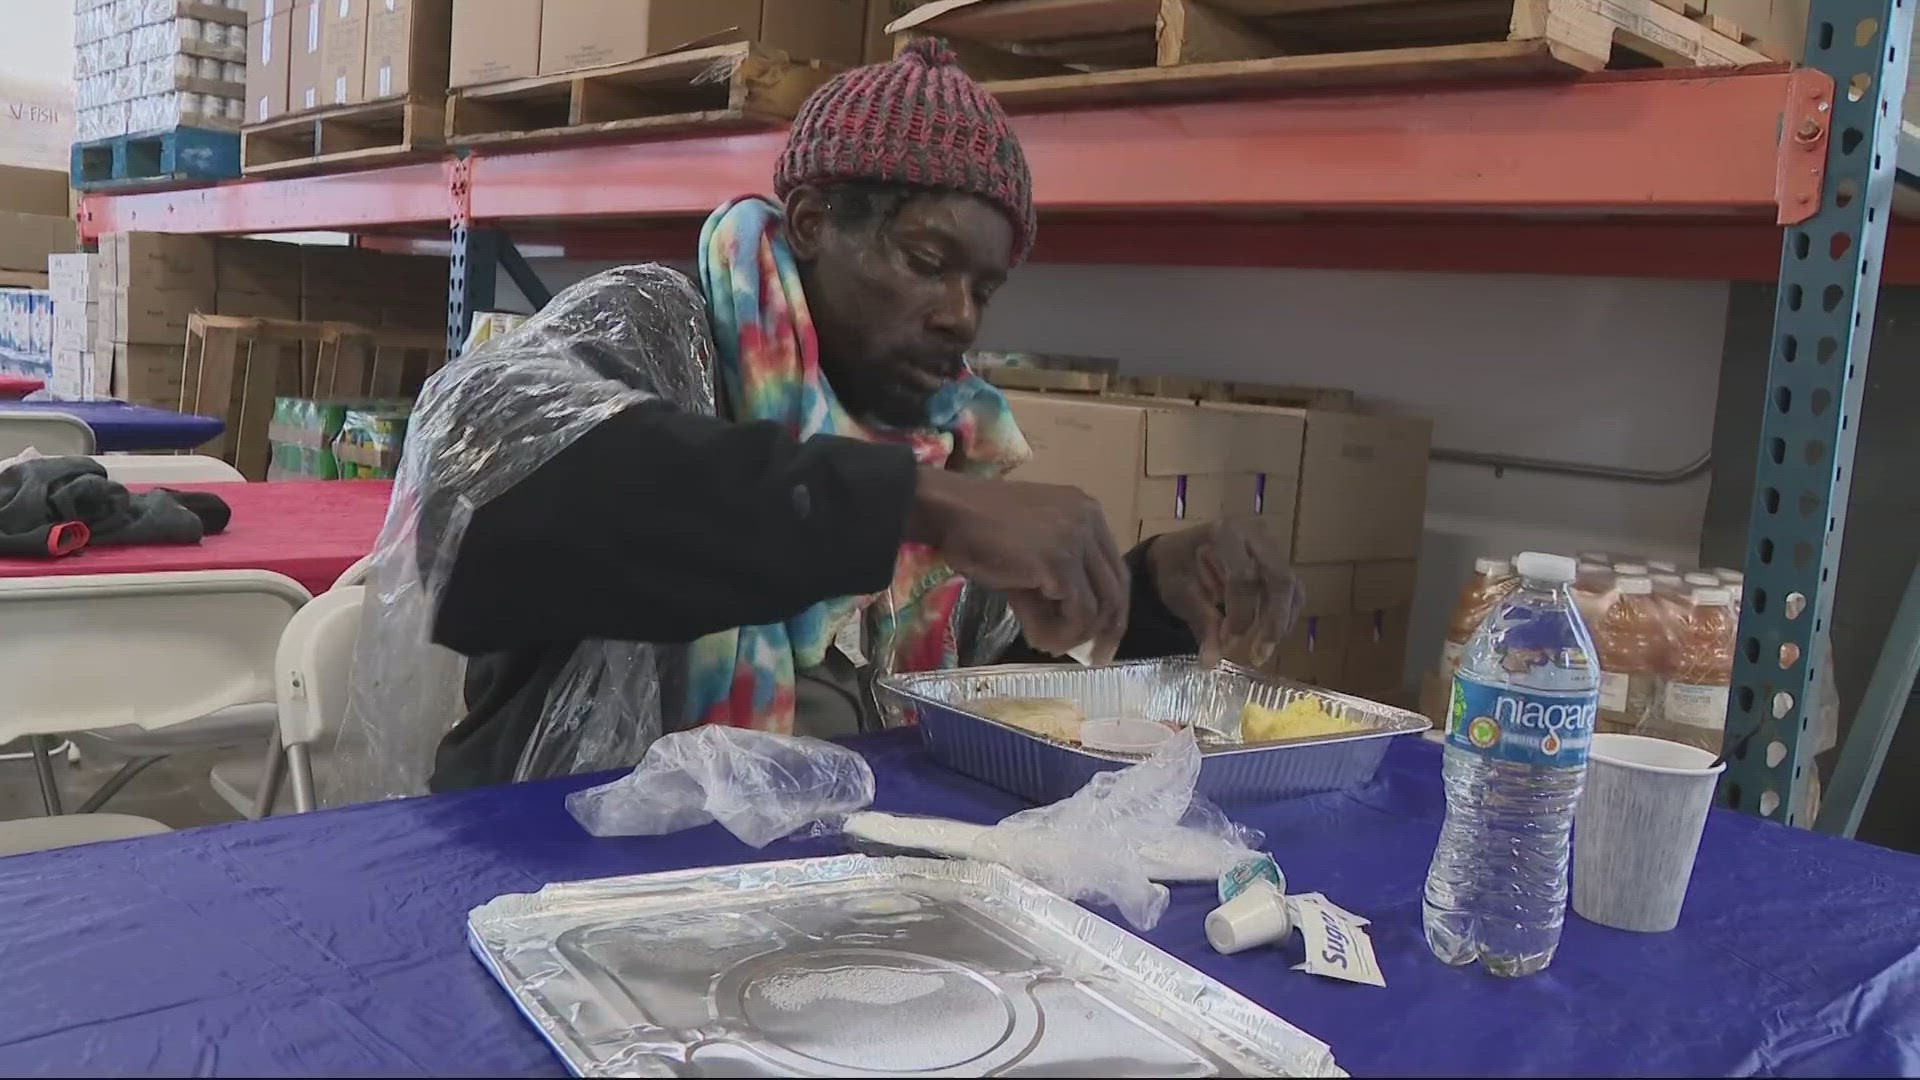 Hundreds of people were treated to a holiday meal by organizations across the area.